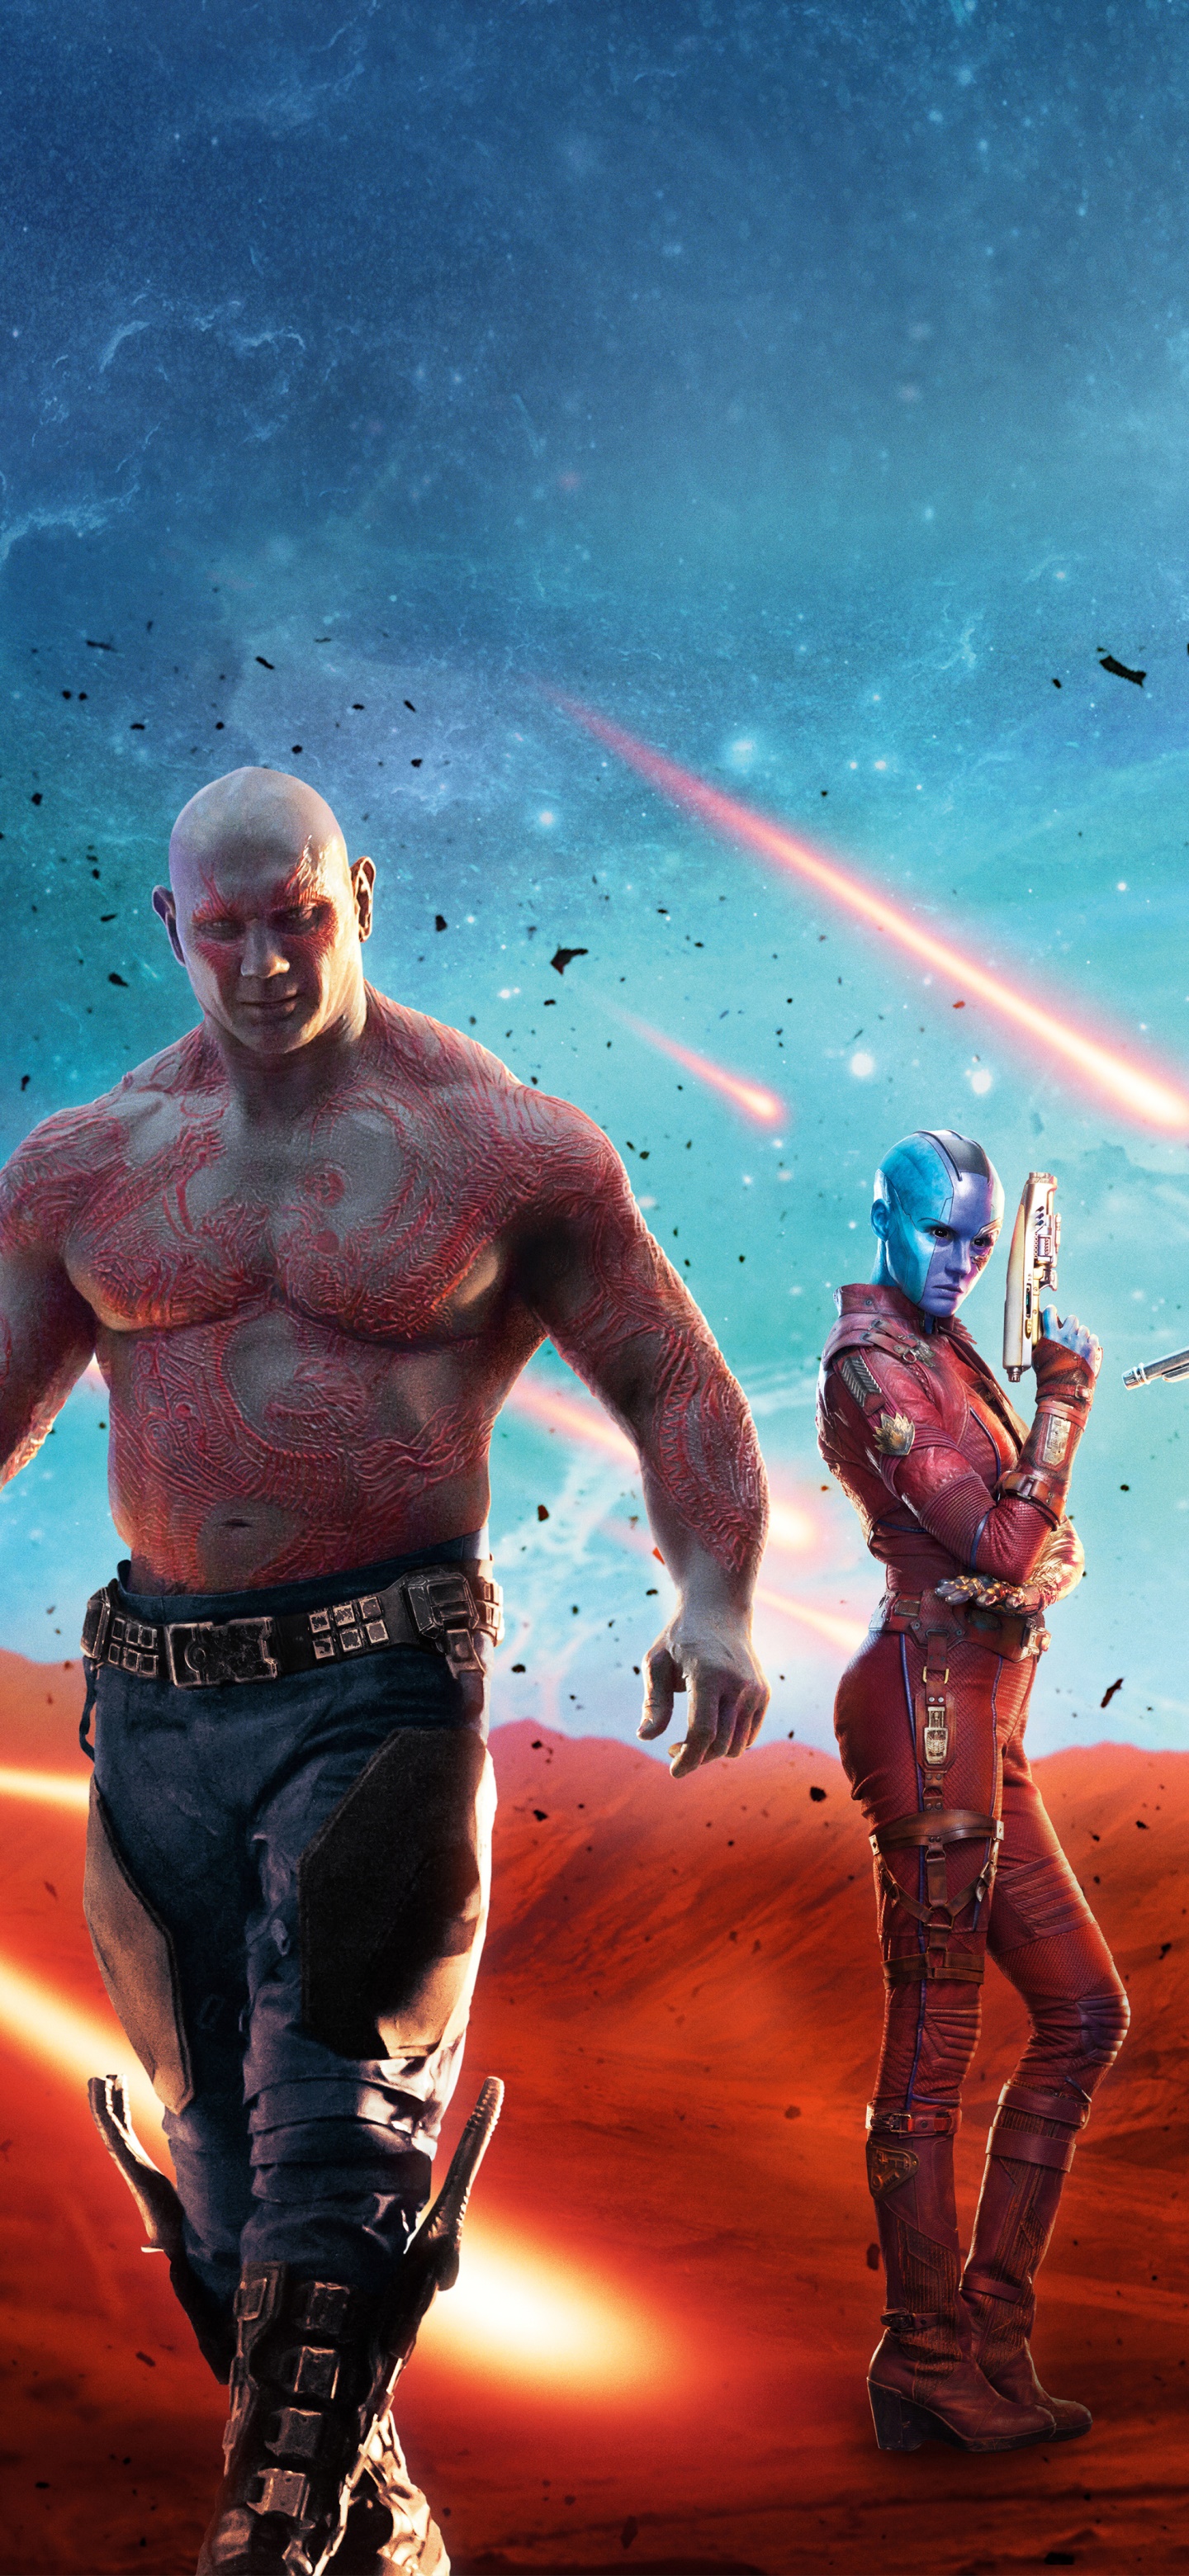 Wallpapers ID: 307488 / Movie Guardians of the Galaxy Vol. 2 Phone Wallpaper, Nebula